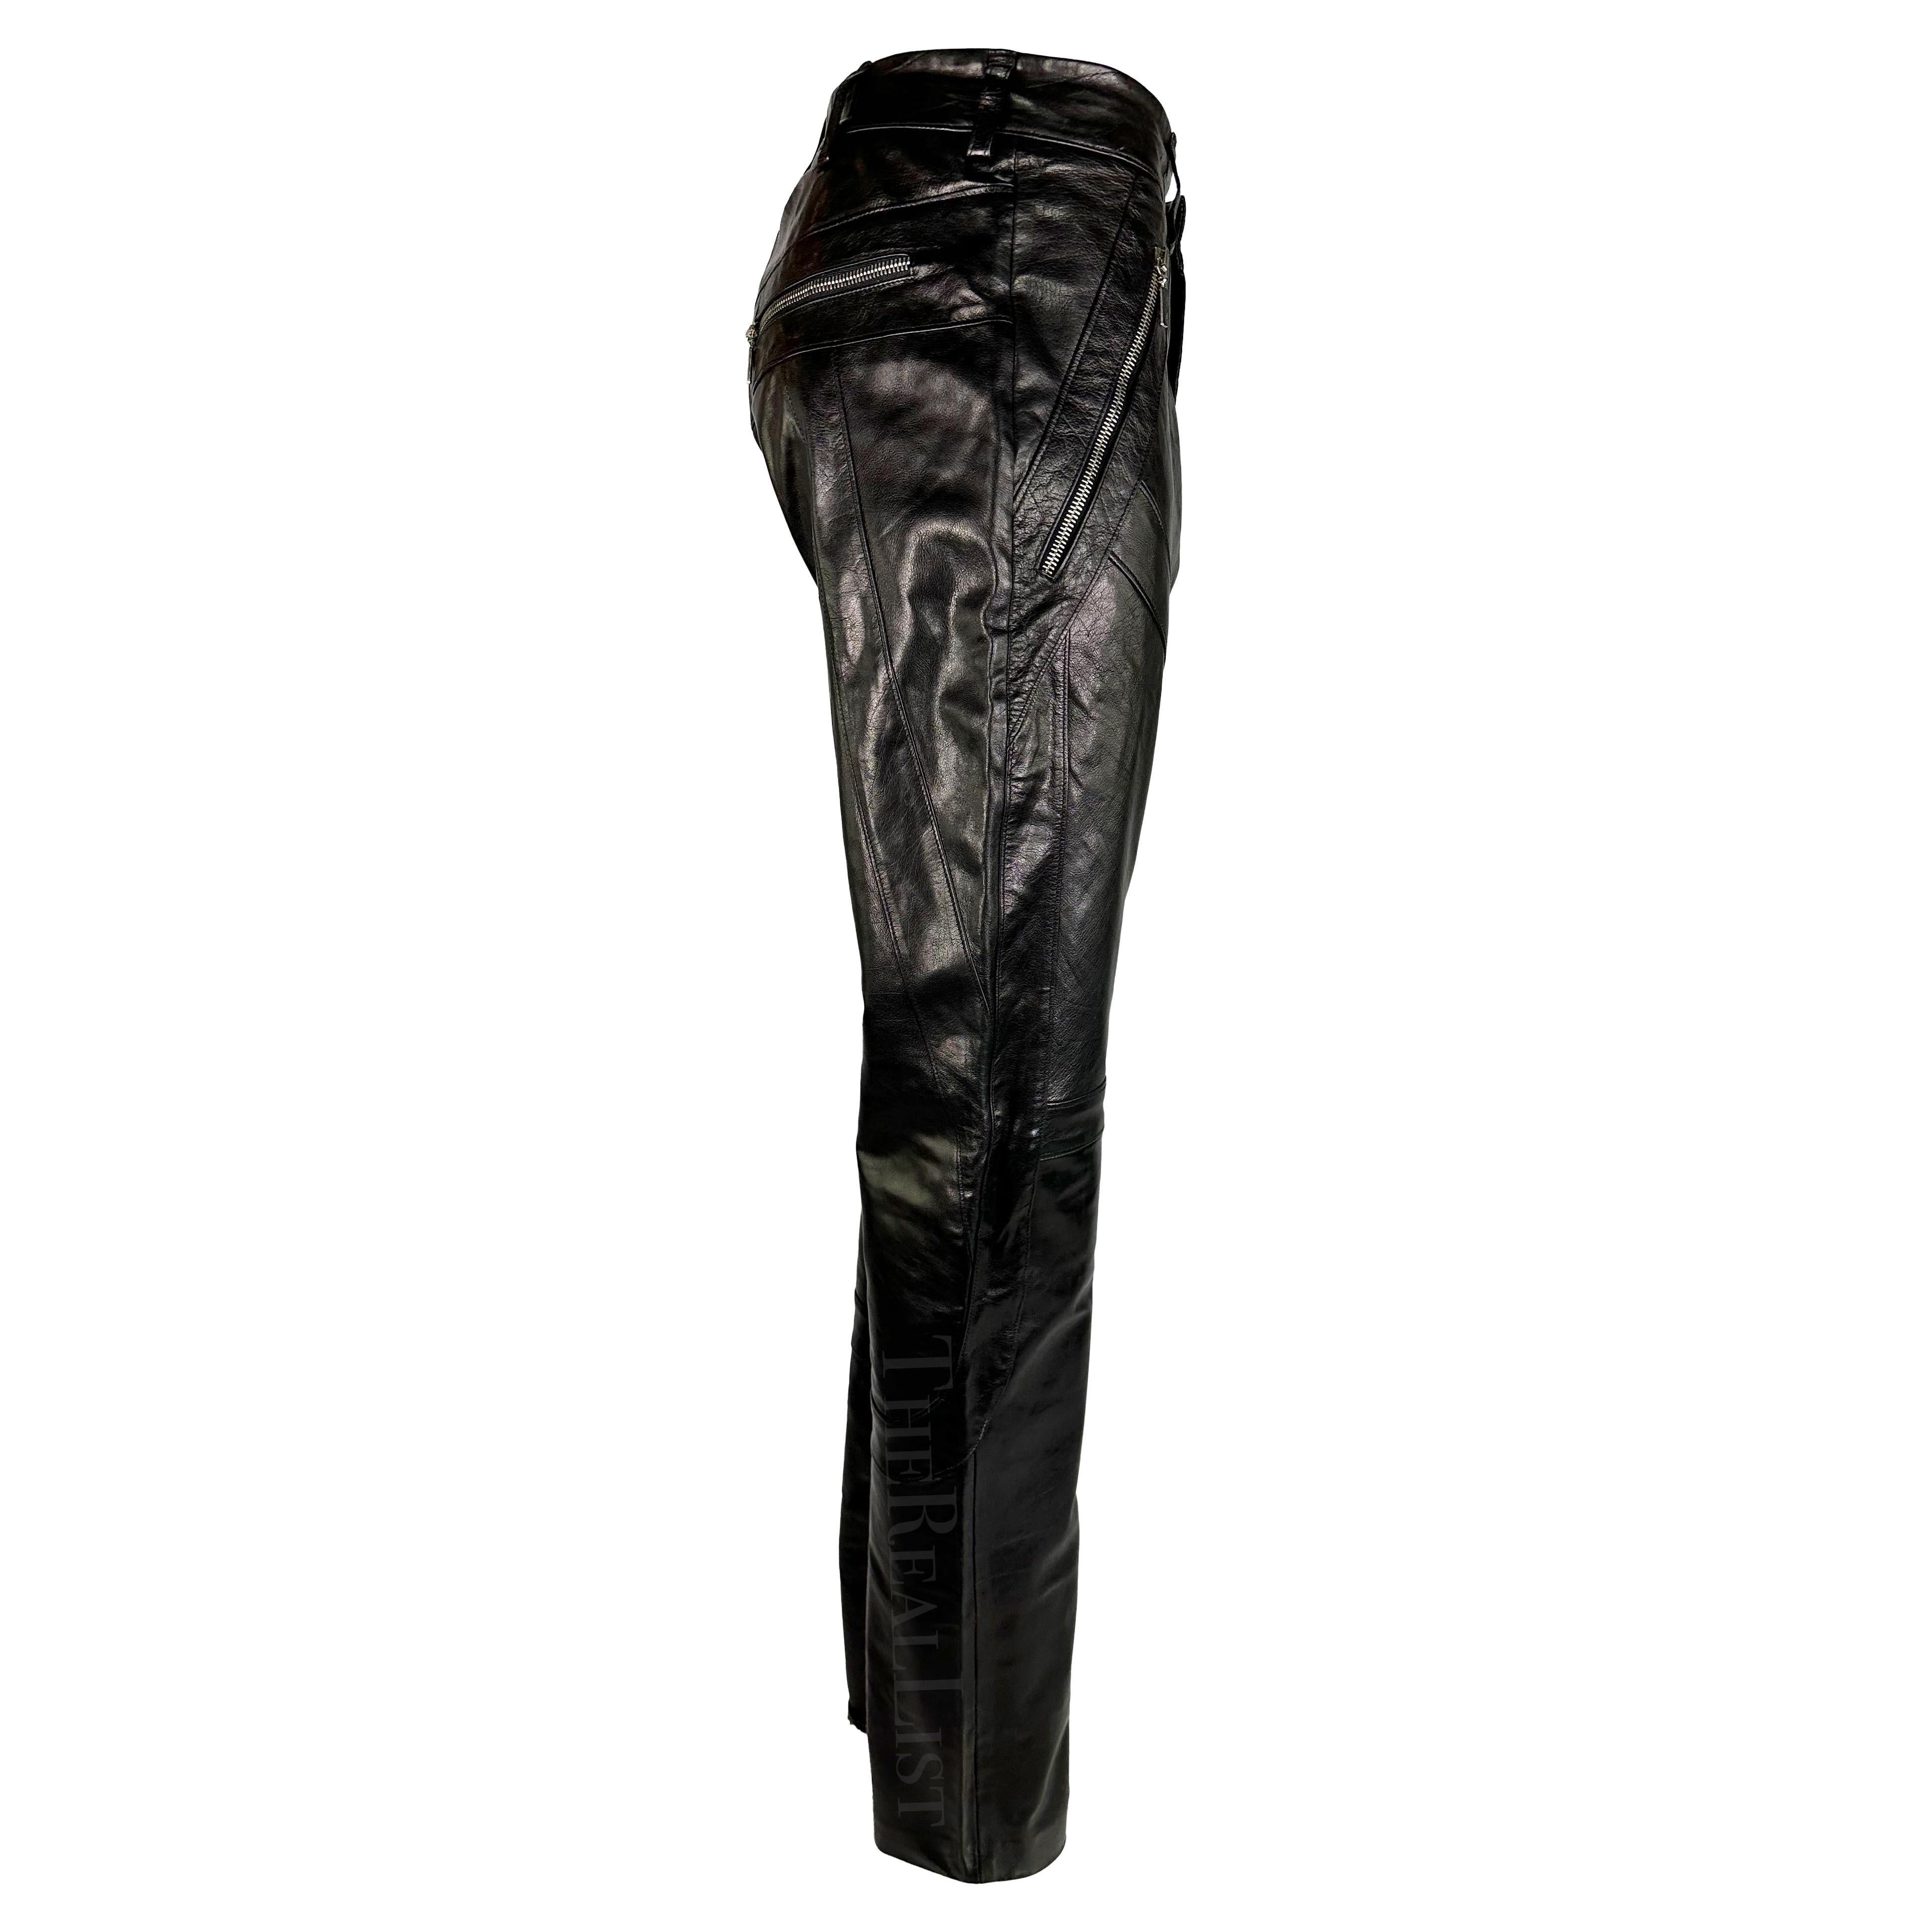 S/S 2002 Gianni Versace by Donatella Black Leather Moto Style Zip Pants For Sale